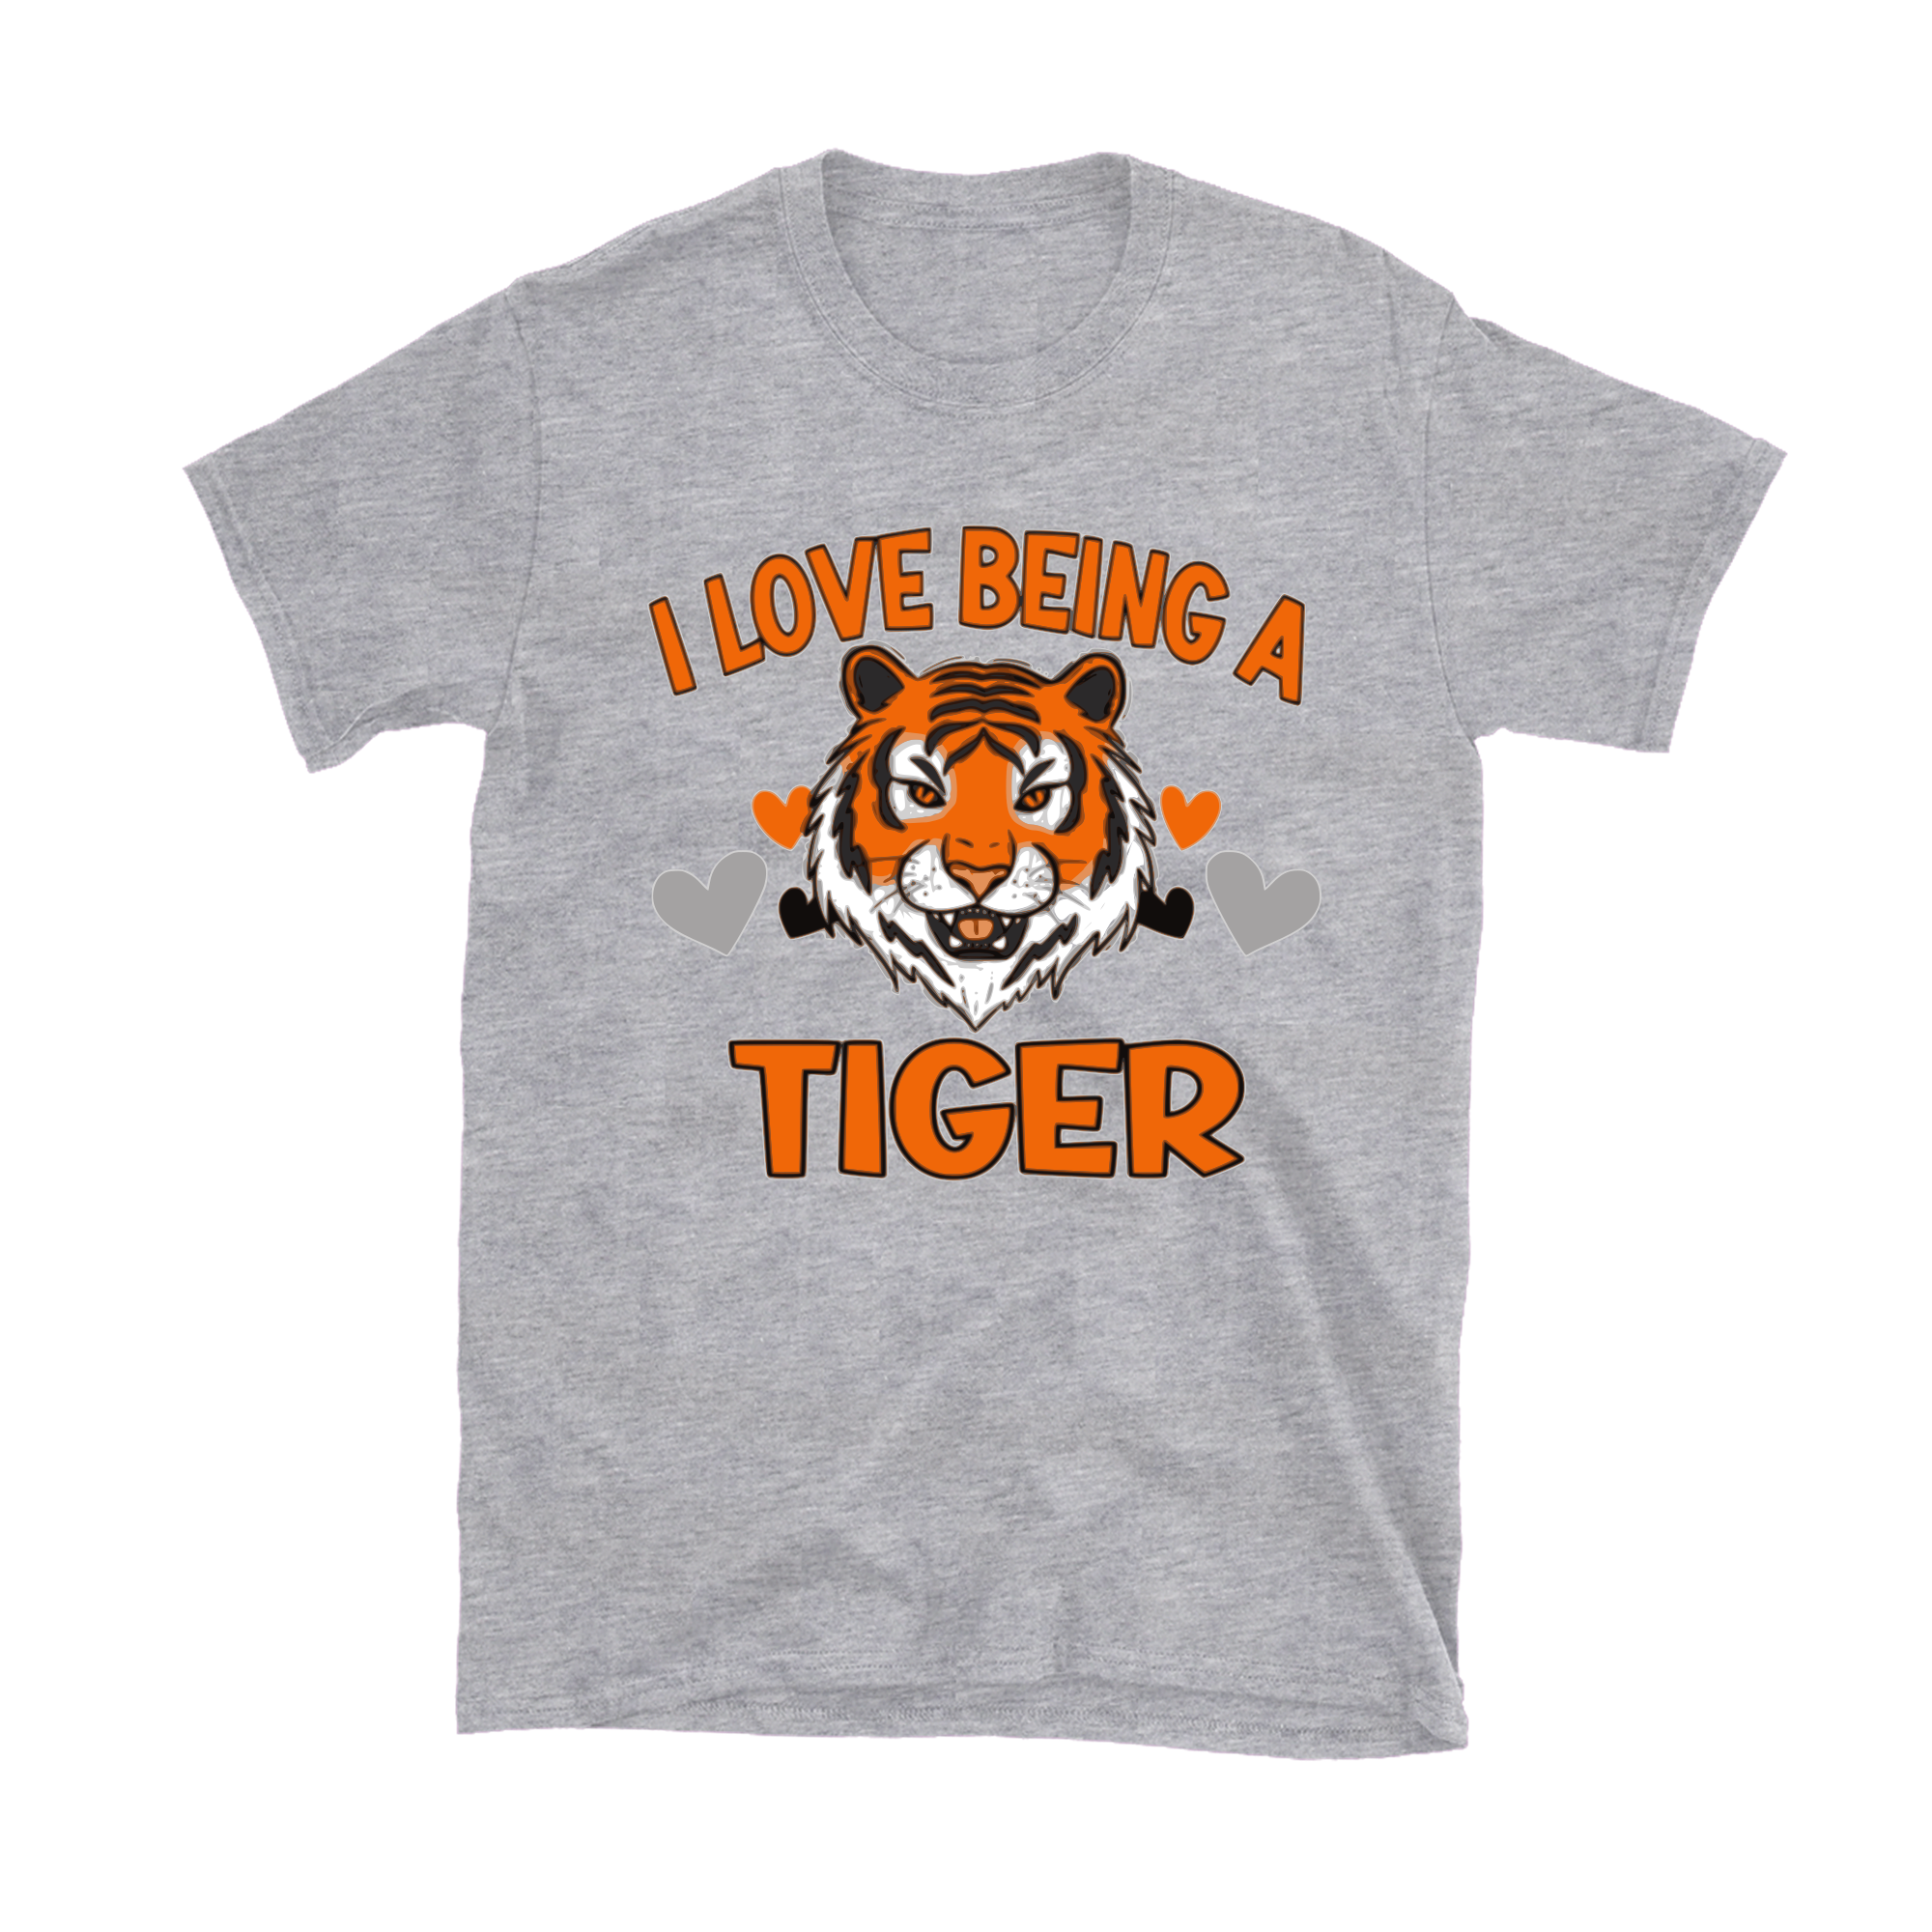 I love being a Tiger T-shirt